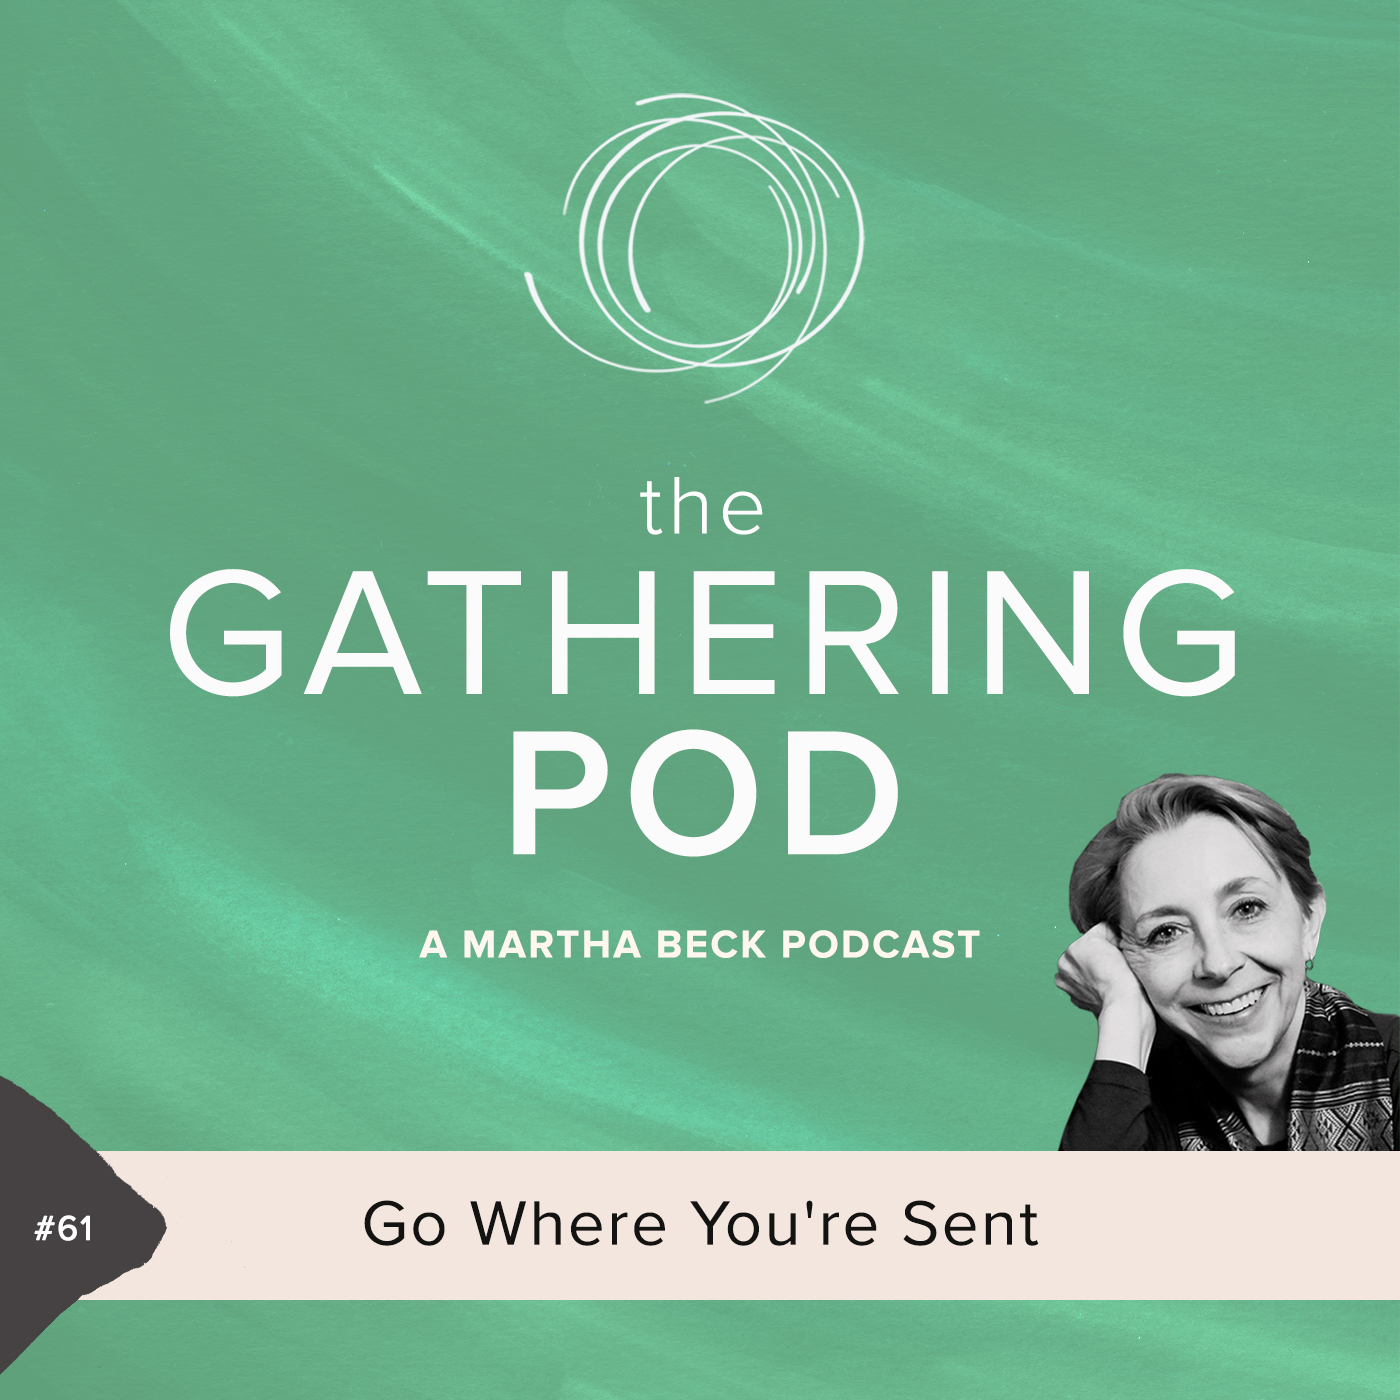 Image for The Gathering Pod A Martha Beck Podcast Episode #61 Go Where You’re Sent